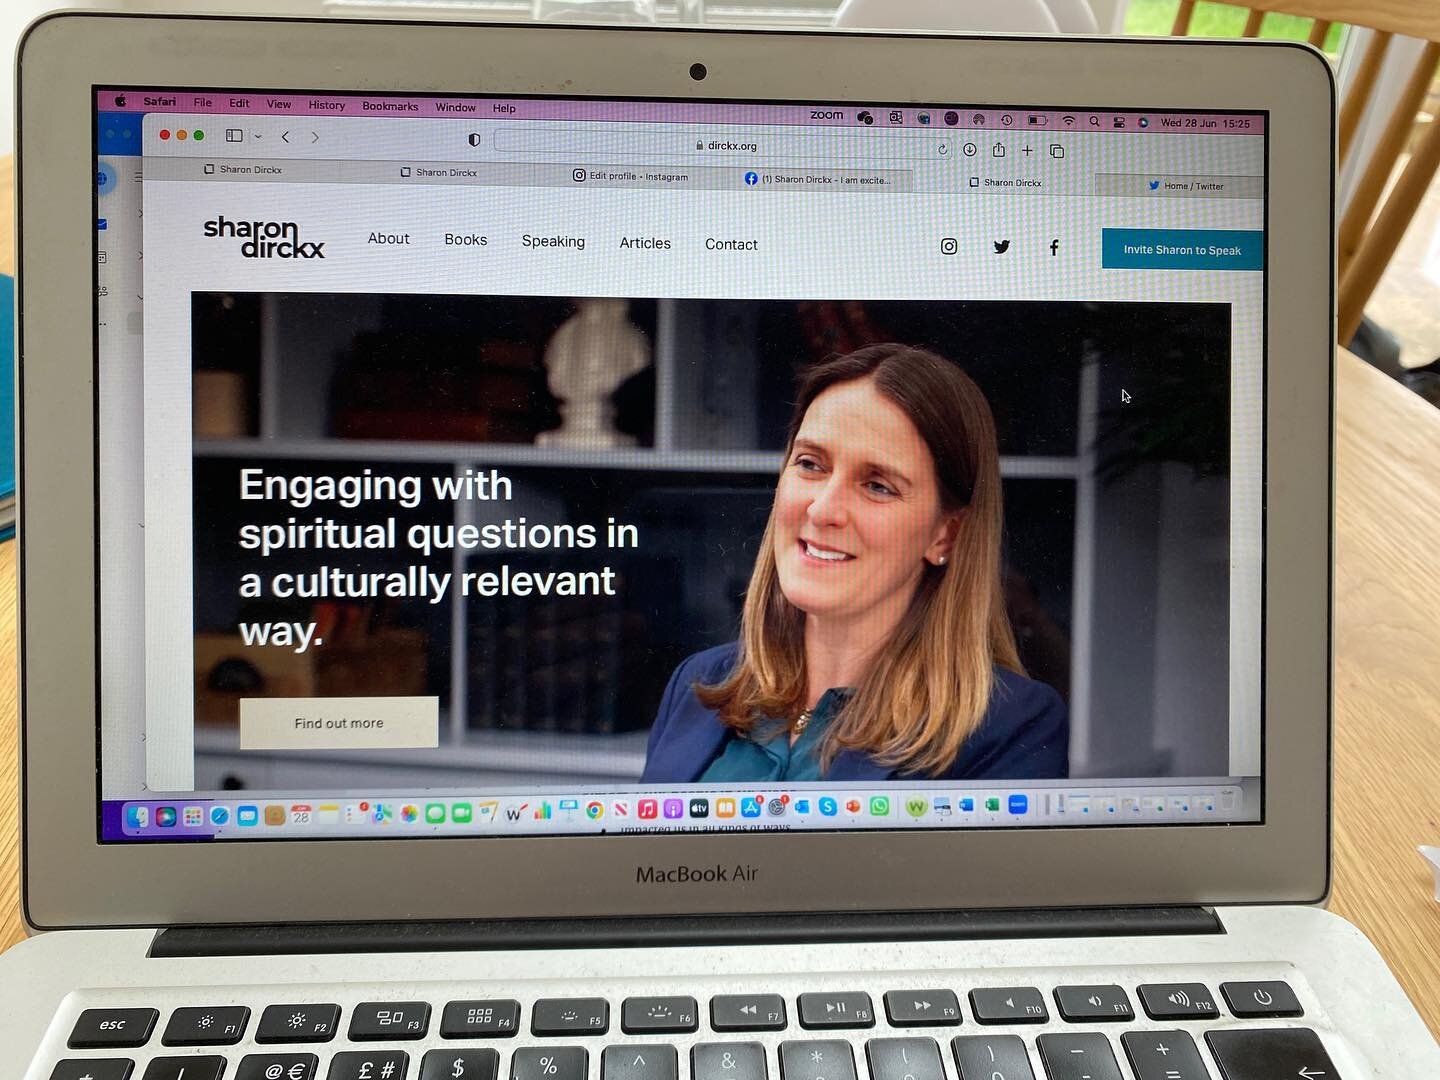 Excited to share that I now have my own website. www.dirckx.org. This is how the best way to reach me for work-related things. Thank you @riosummers for your amazing work in getting this up &amp; running!